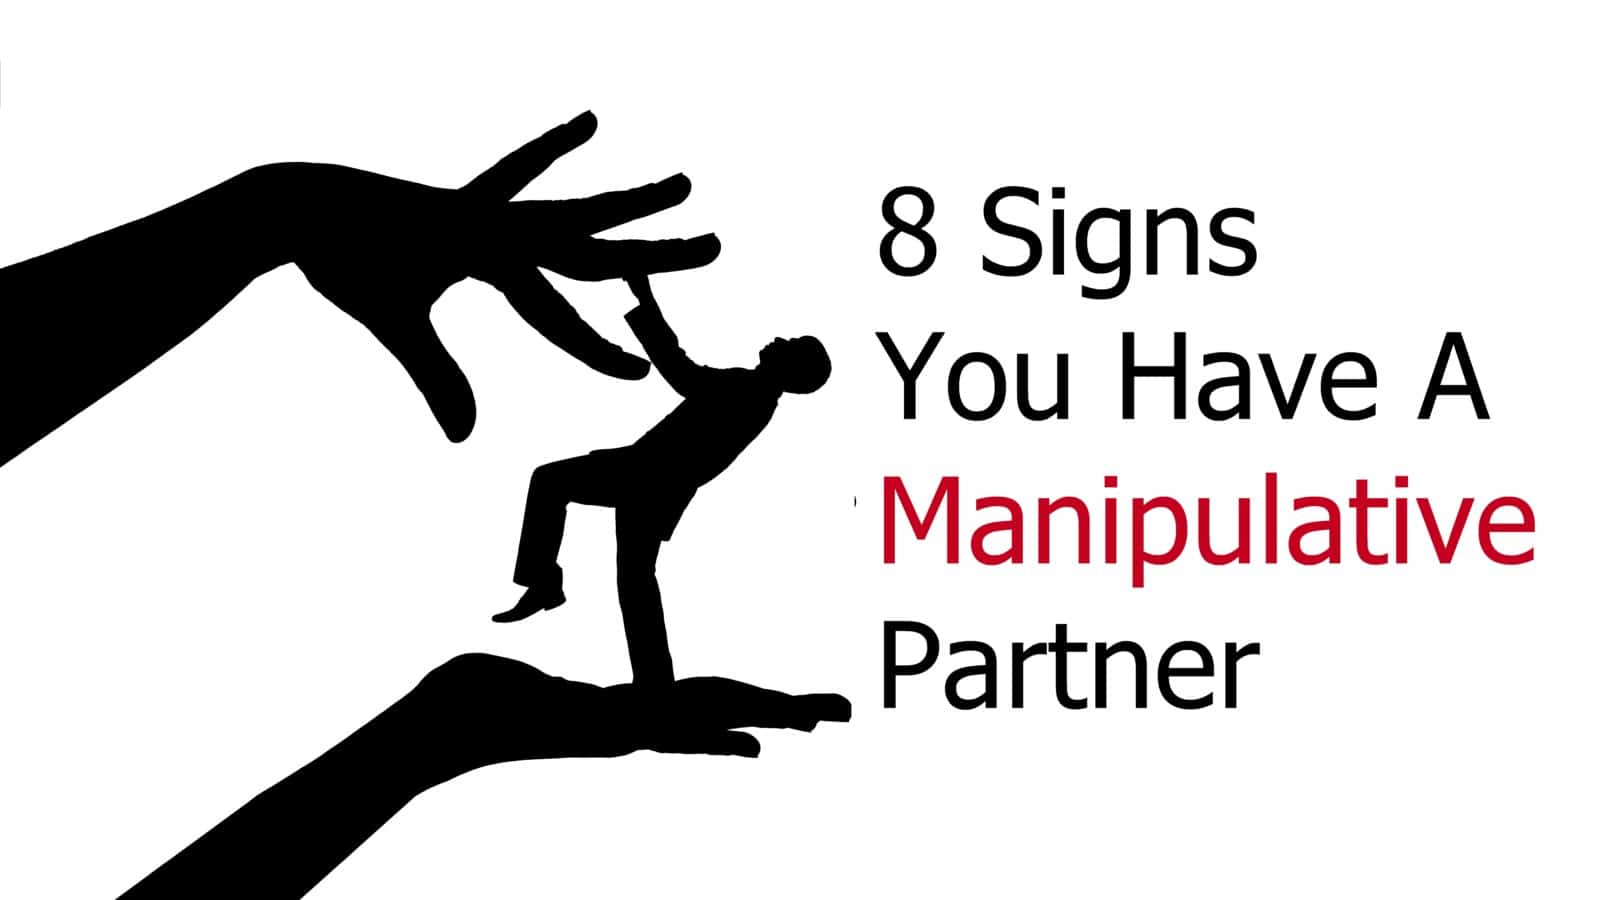 8 Signs You Have A Manipulative Partner